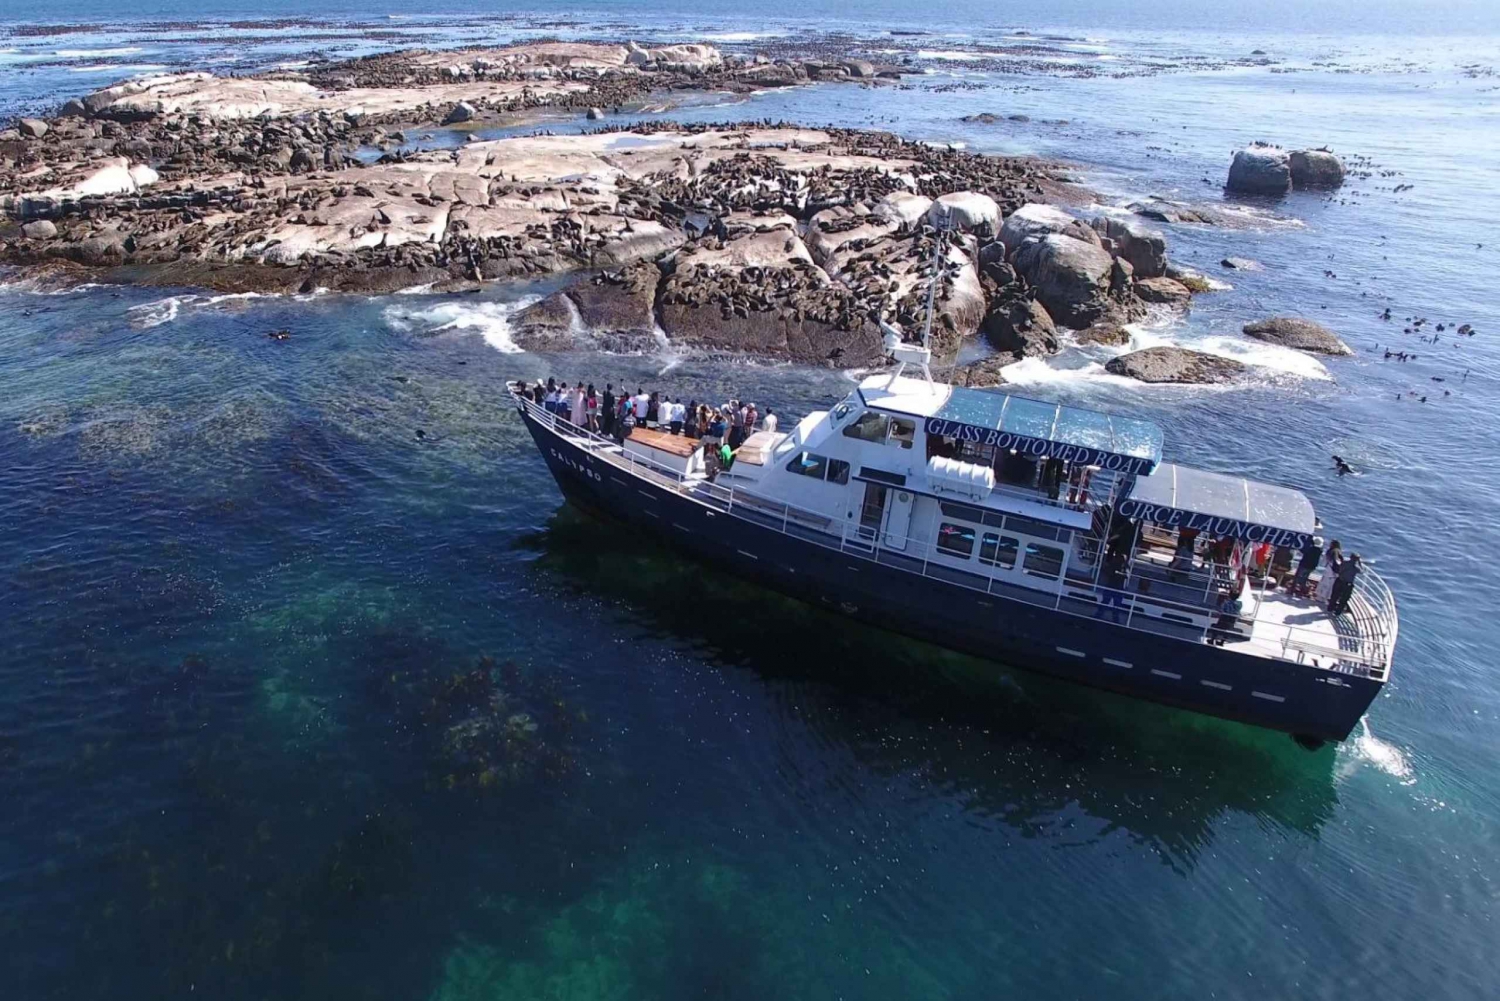 Ganztagestour Private Cape Peninsula and Boulders Beach Tour